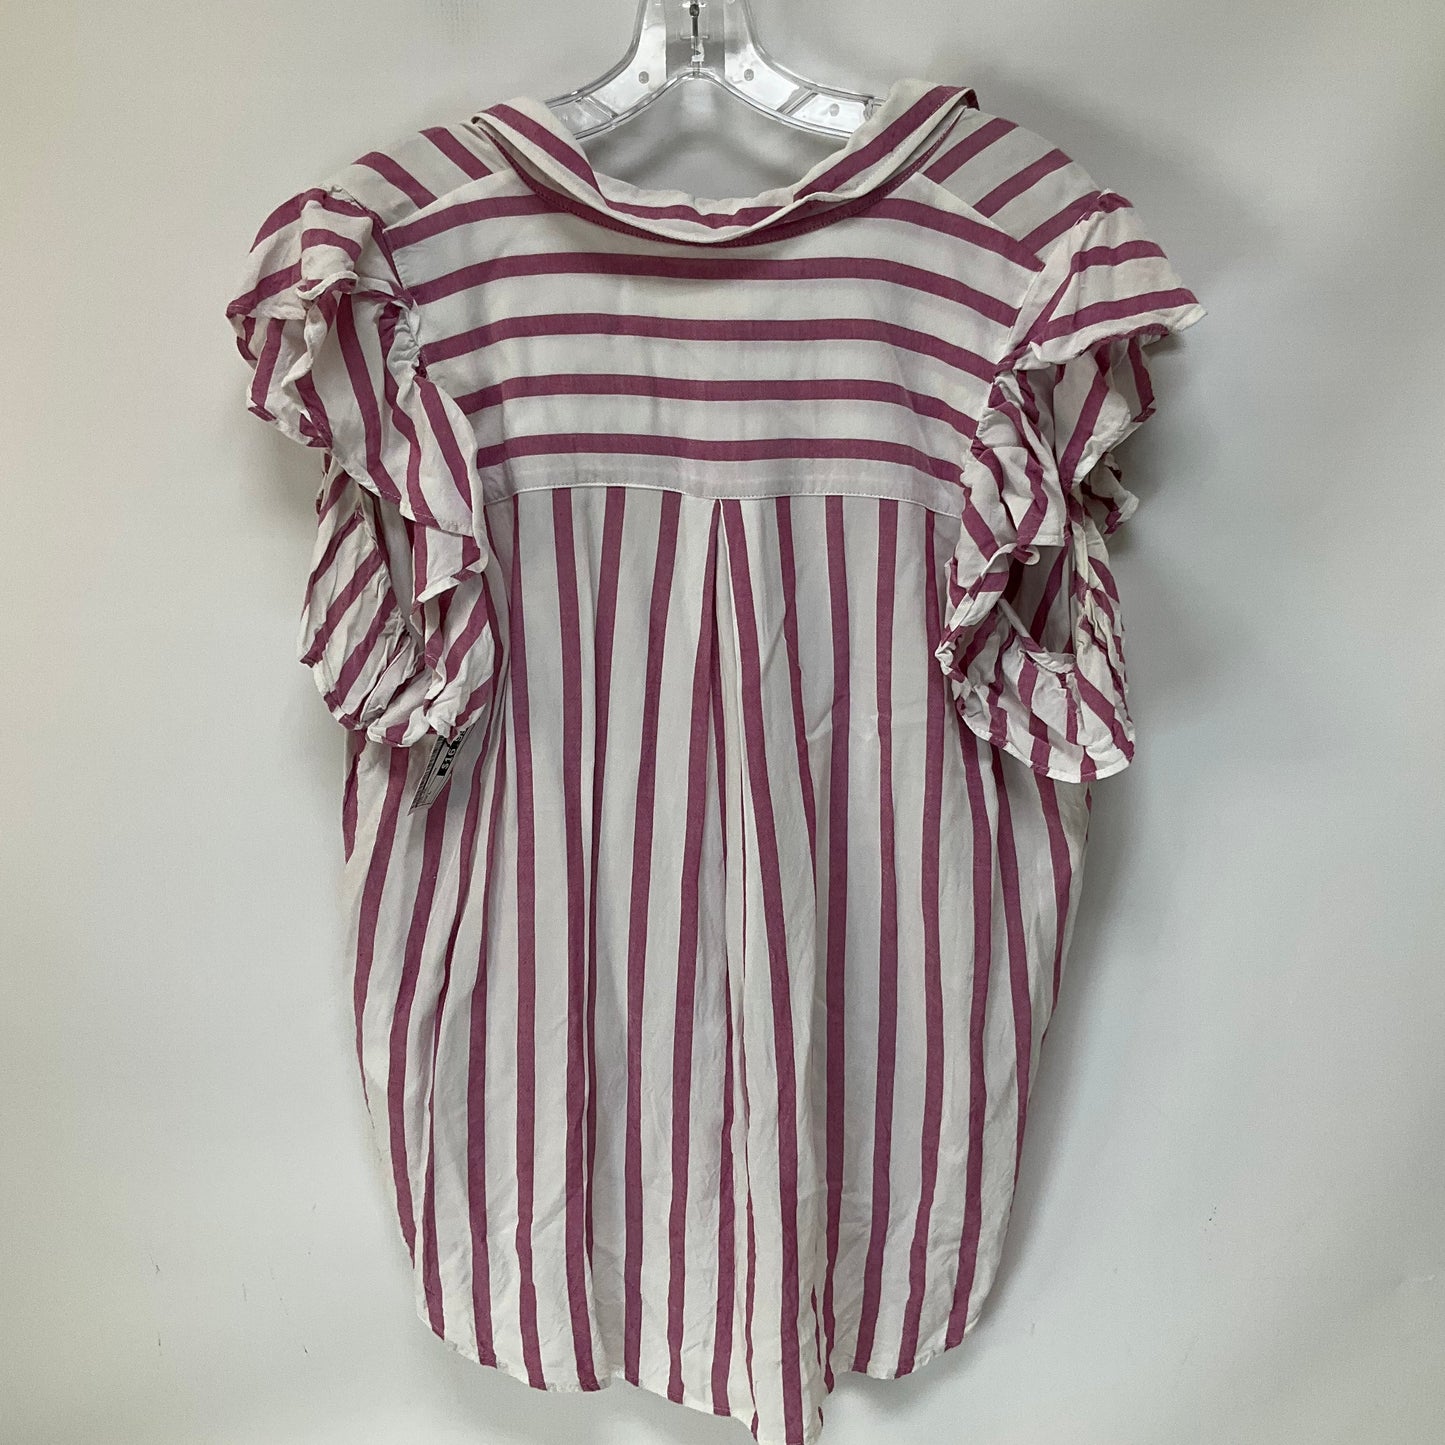 Striped Pattern Top Short Sleeve Maeve, Size L